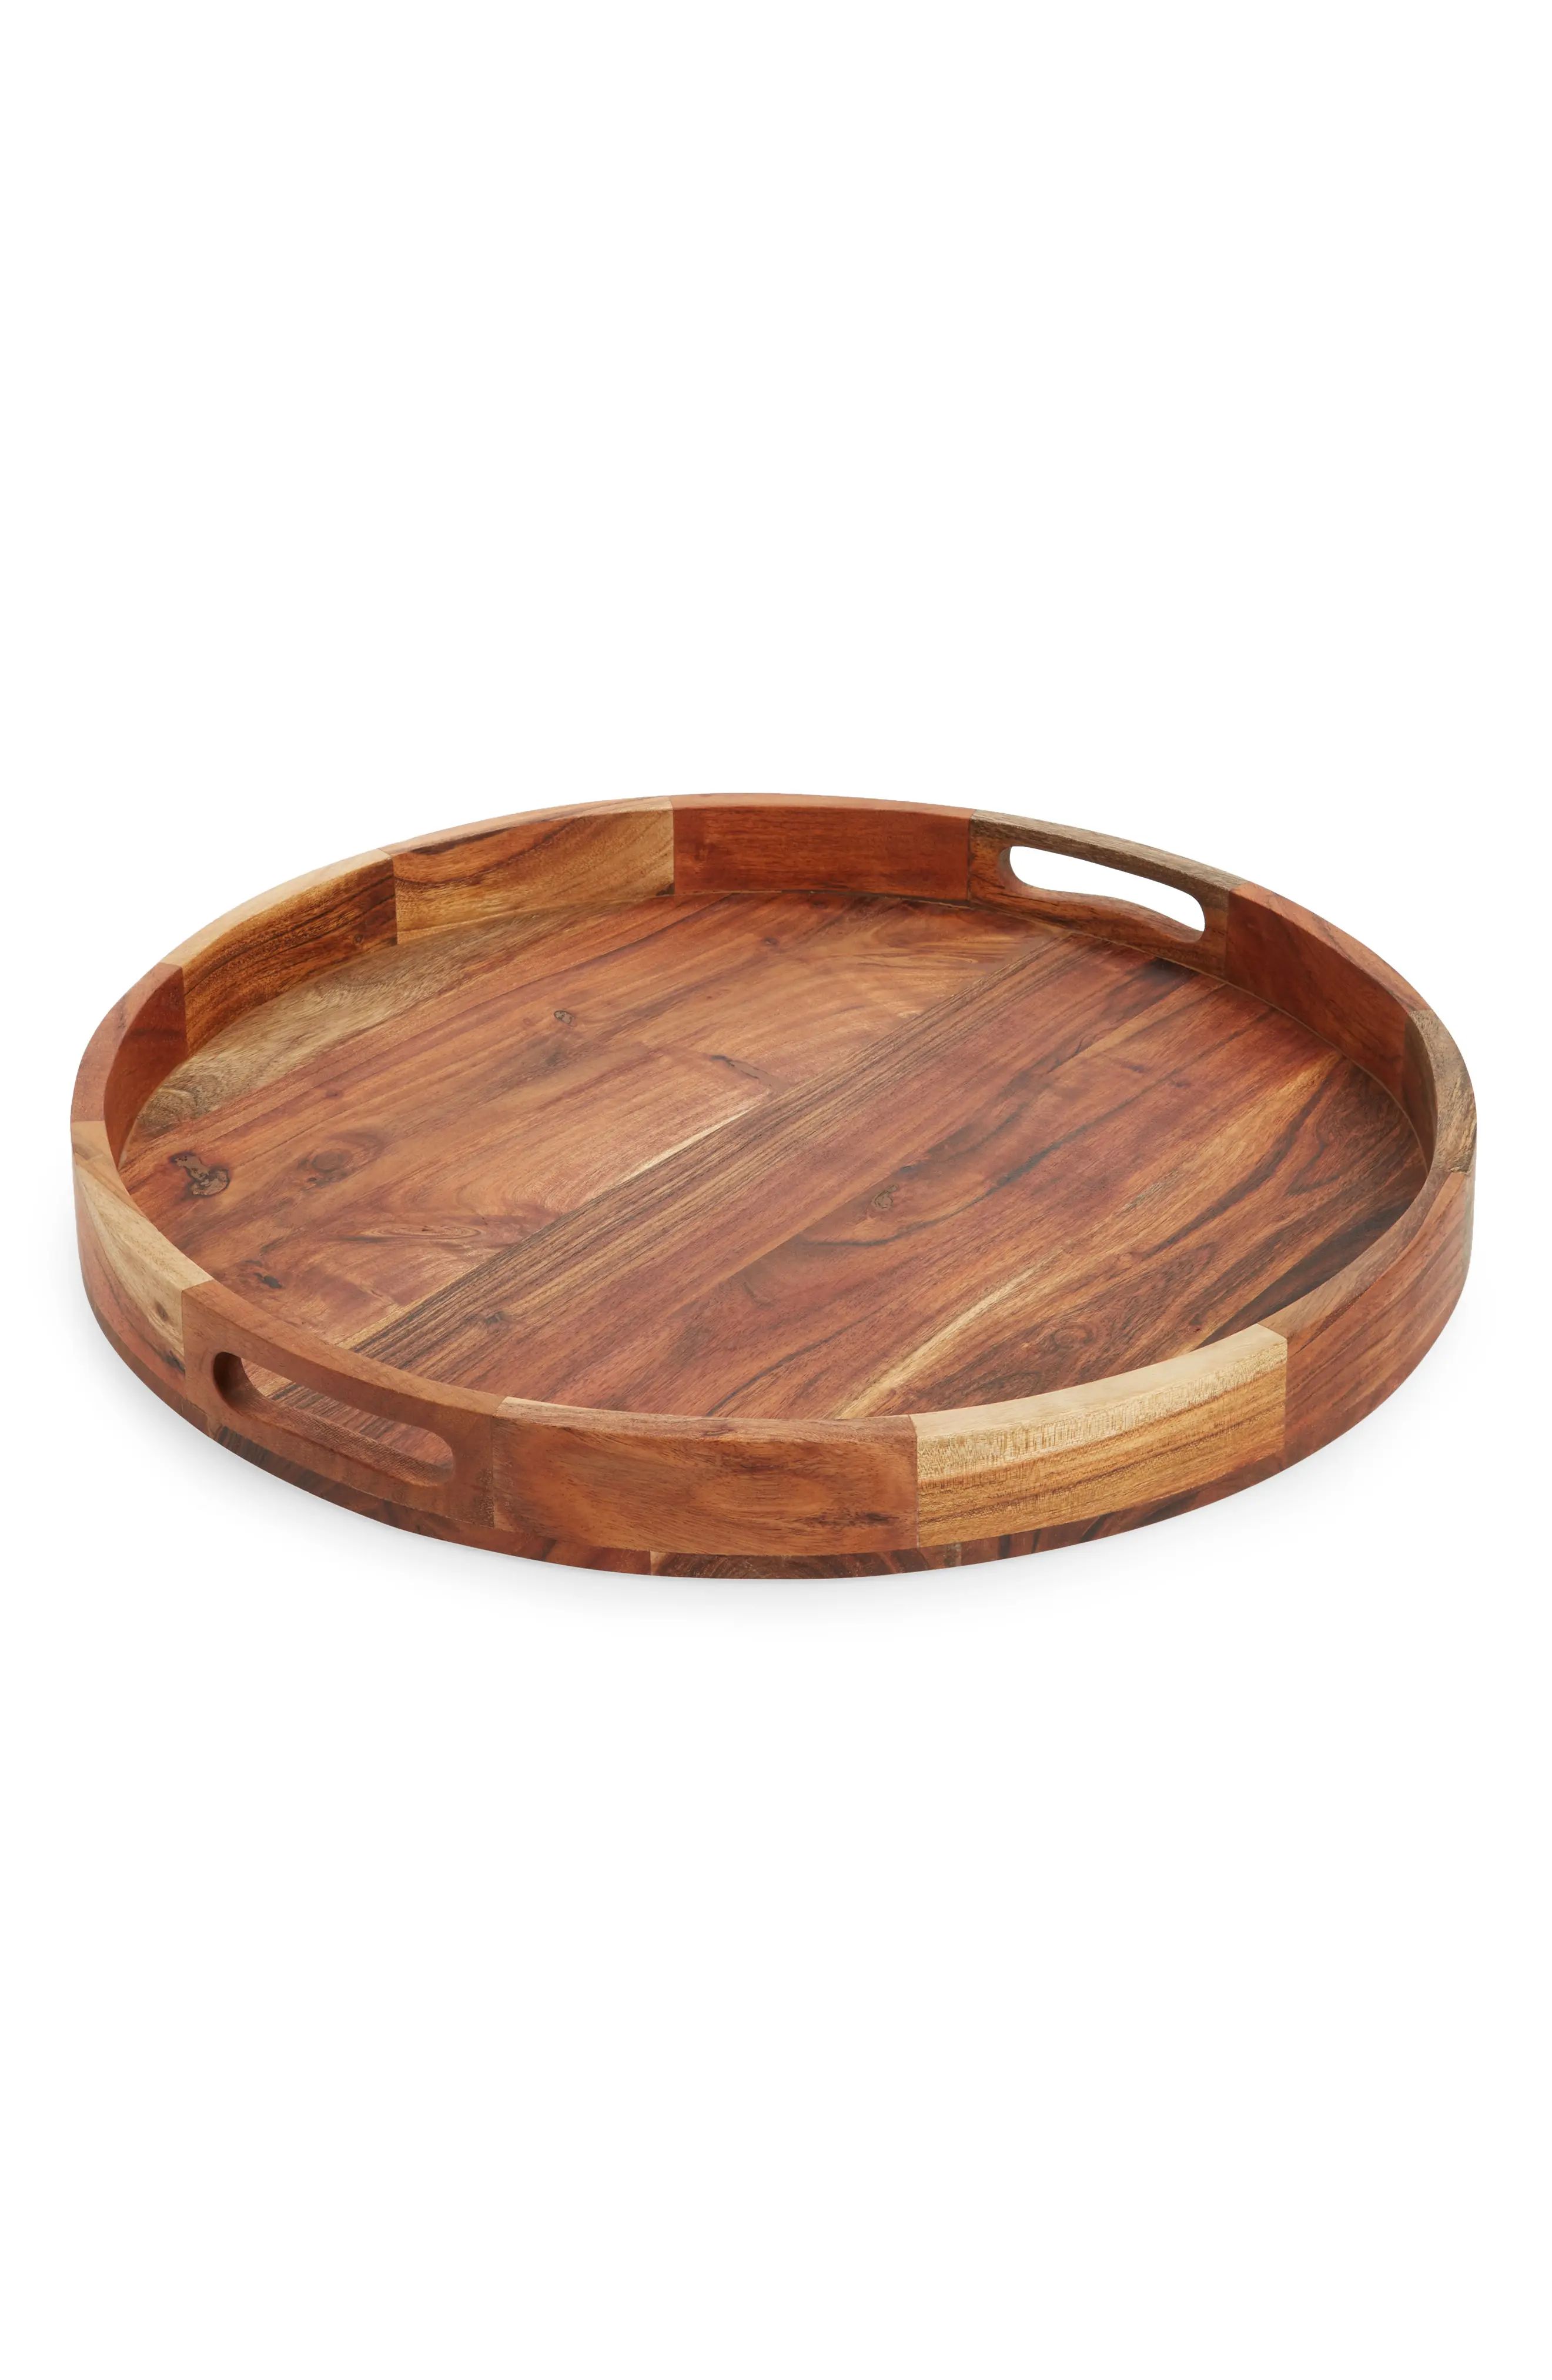 Nordstrom At Home Large Round Acacia Wood Serving Tray, Size One Size - Brown | Nordstrom